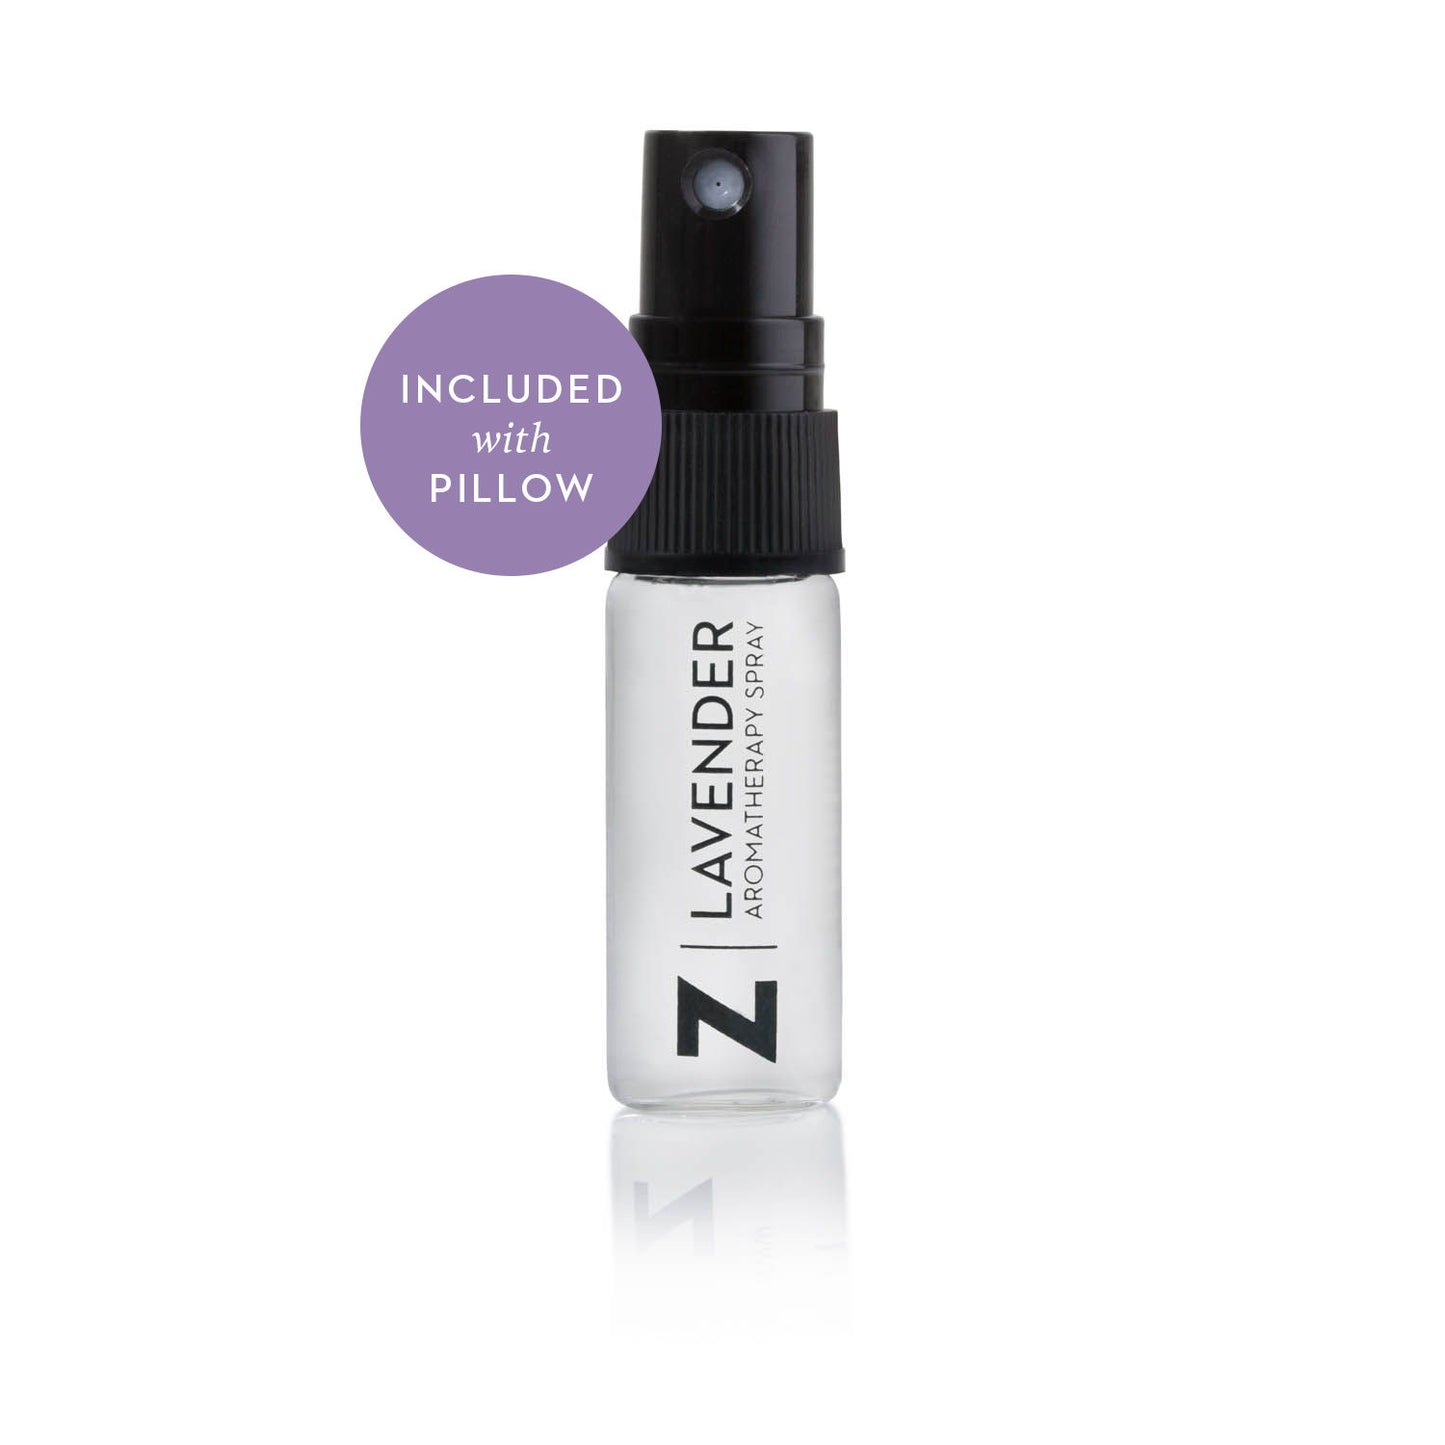 Zoned - Dough® Lavender With Spritzer Pillow - Travel